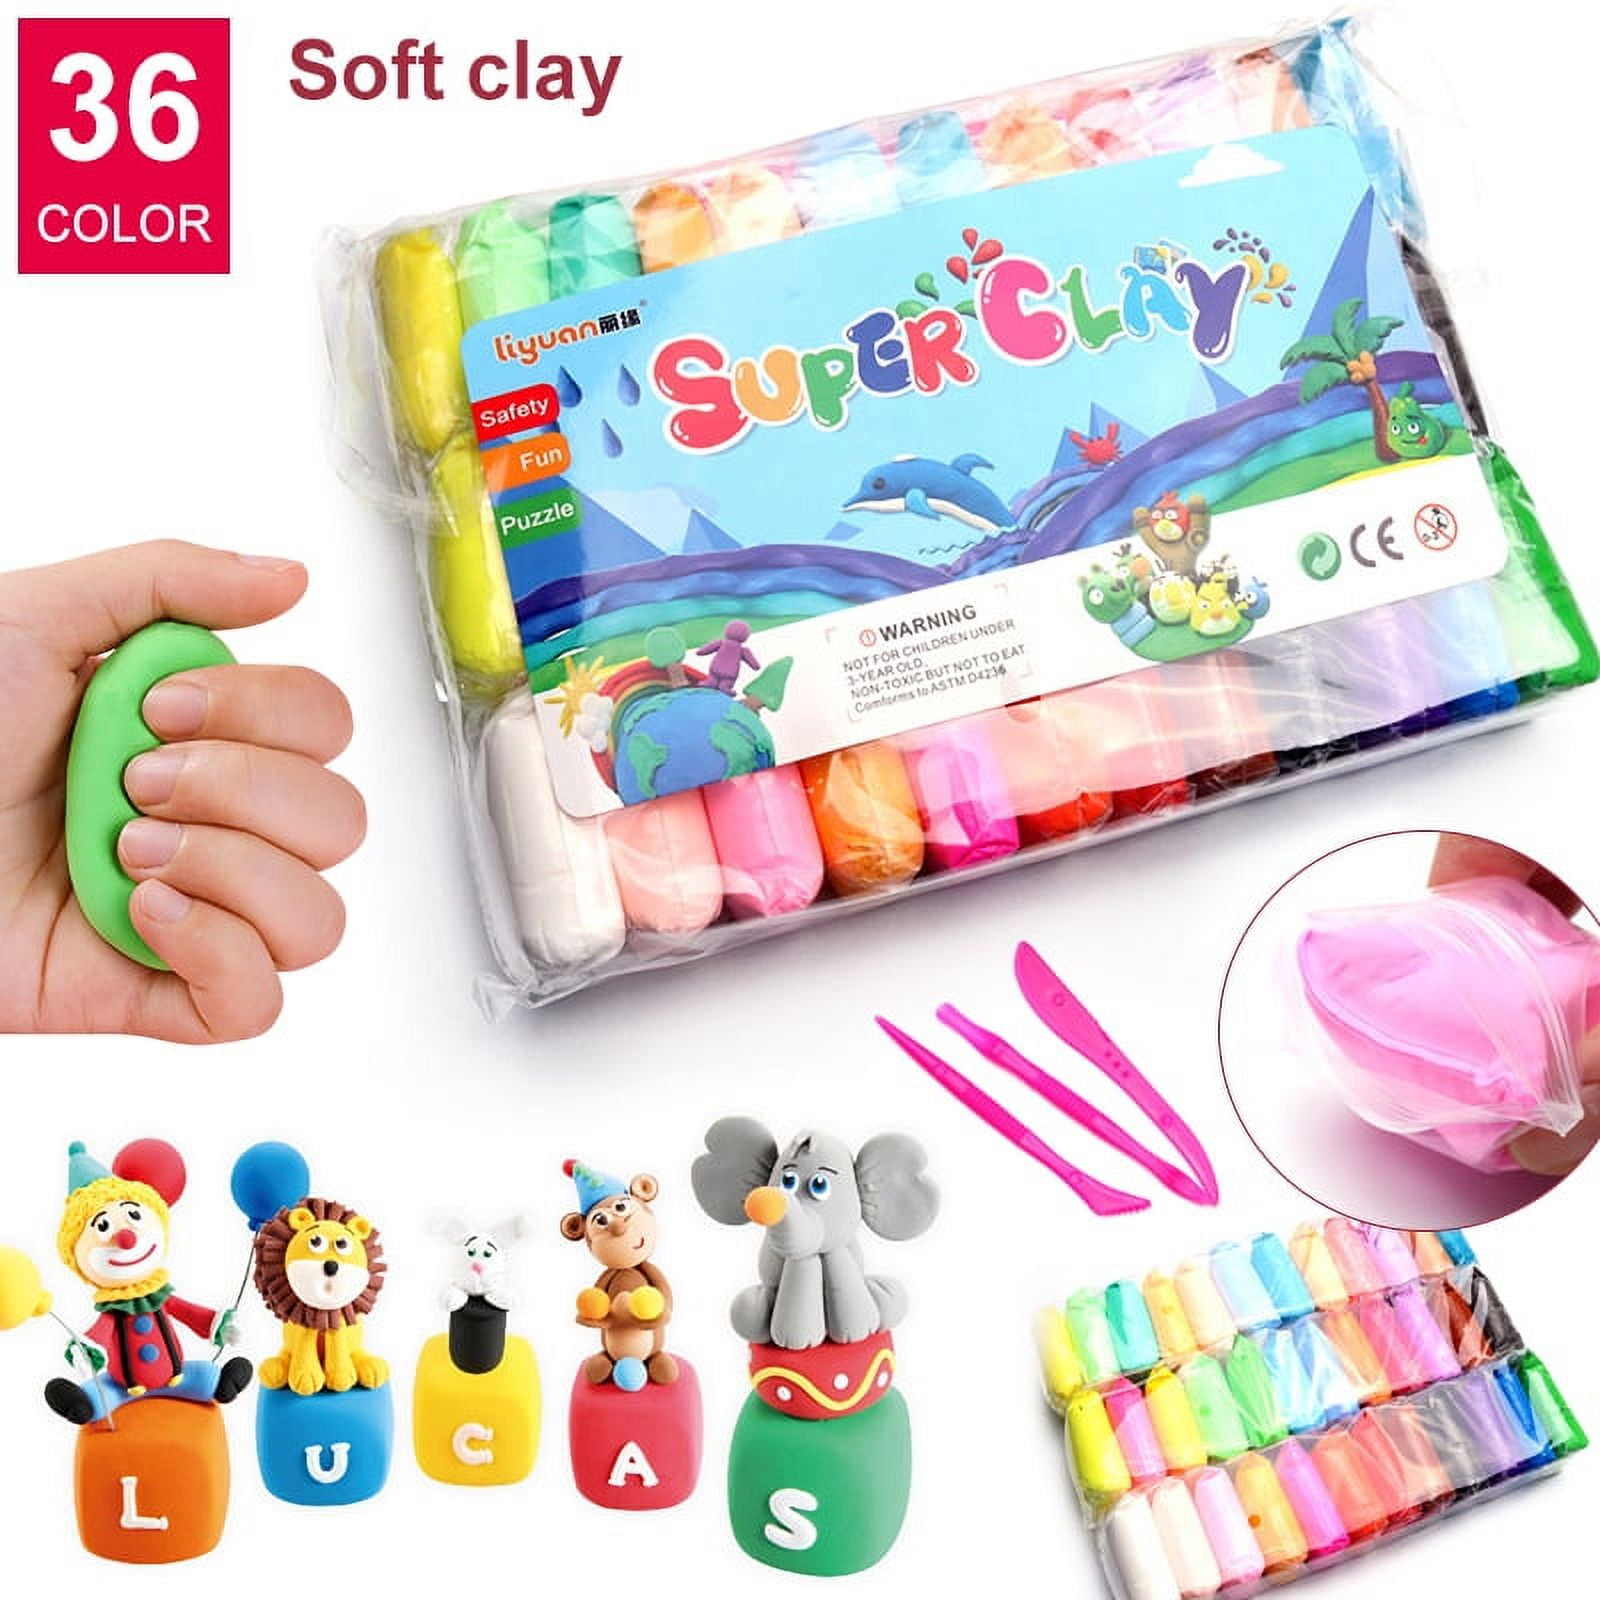 Wolwefa Modeling Clay Kit - 36 Colors Air Dry Ultra Light Clay